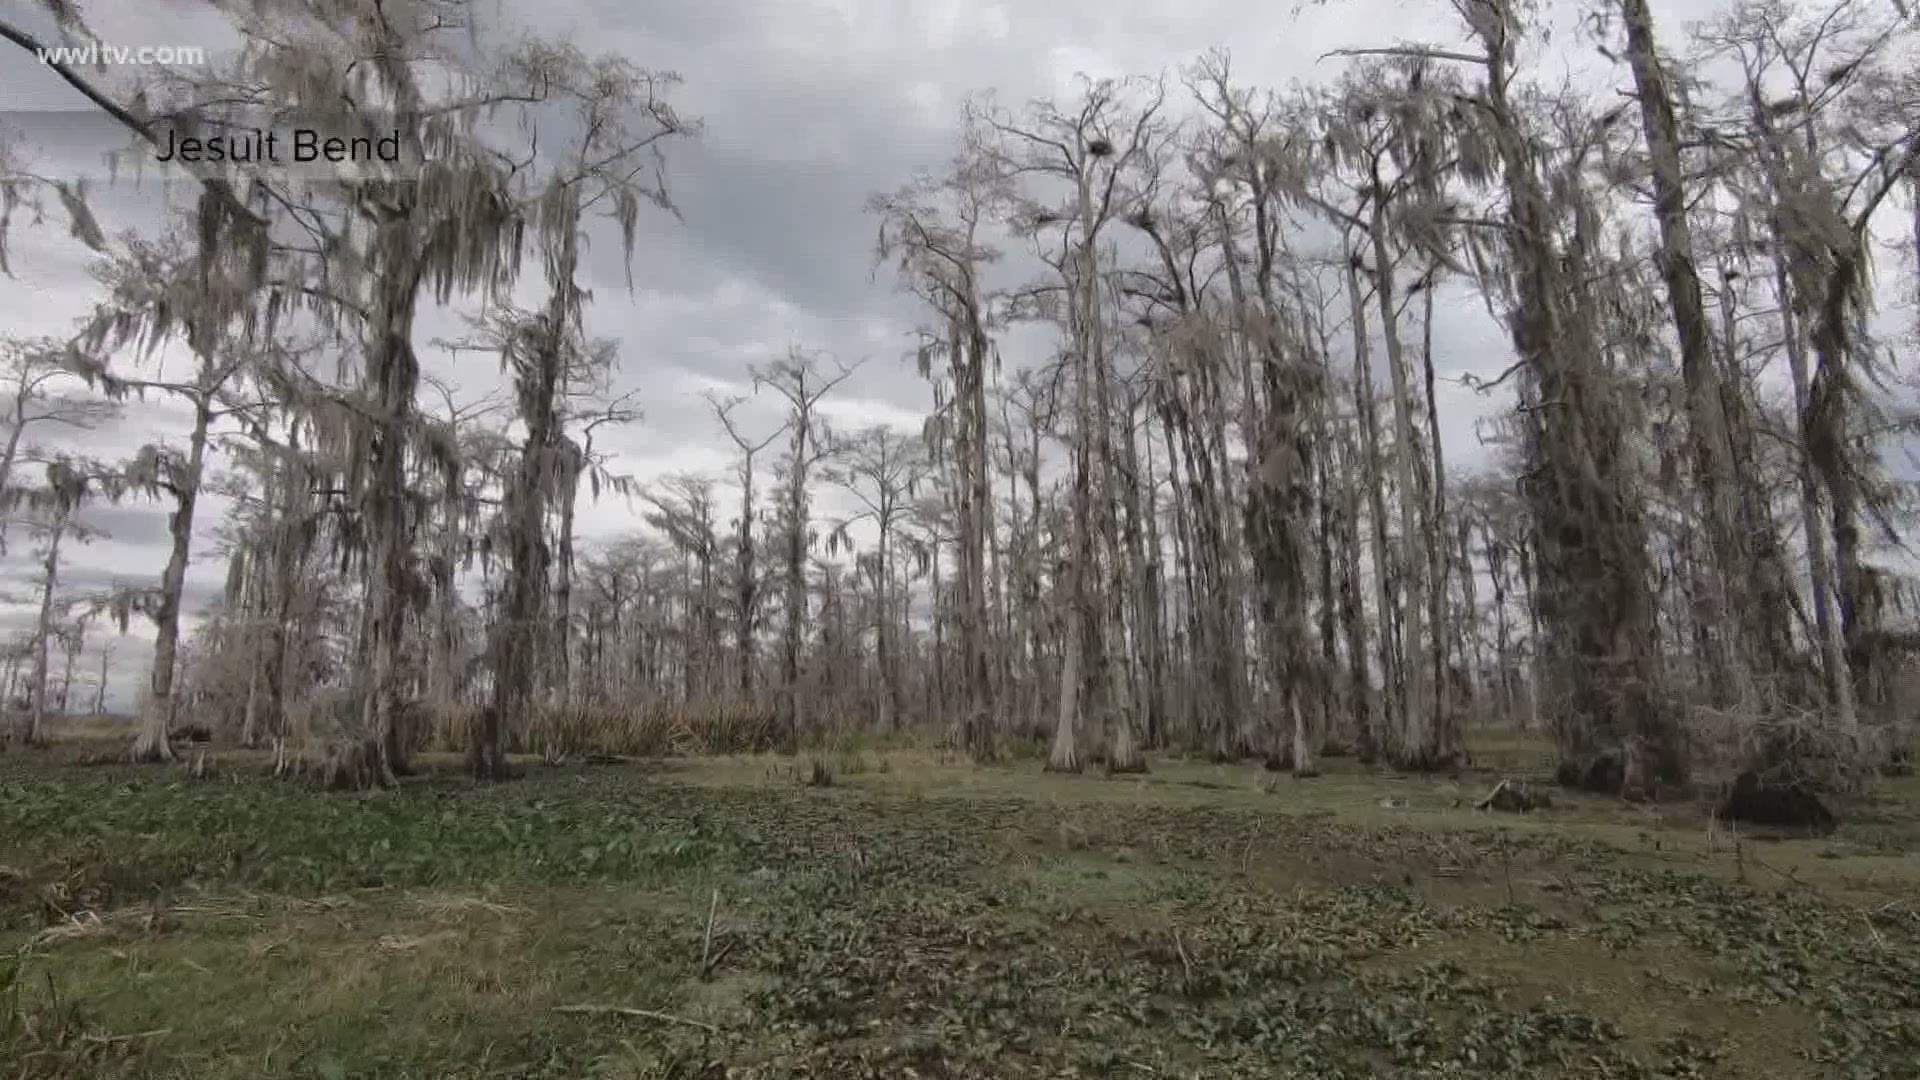 Private companies have invested tens of millions of dollars building “mitigation banks,” critical marsh restoration projects to help save the fragile Louisiana coast